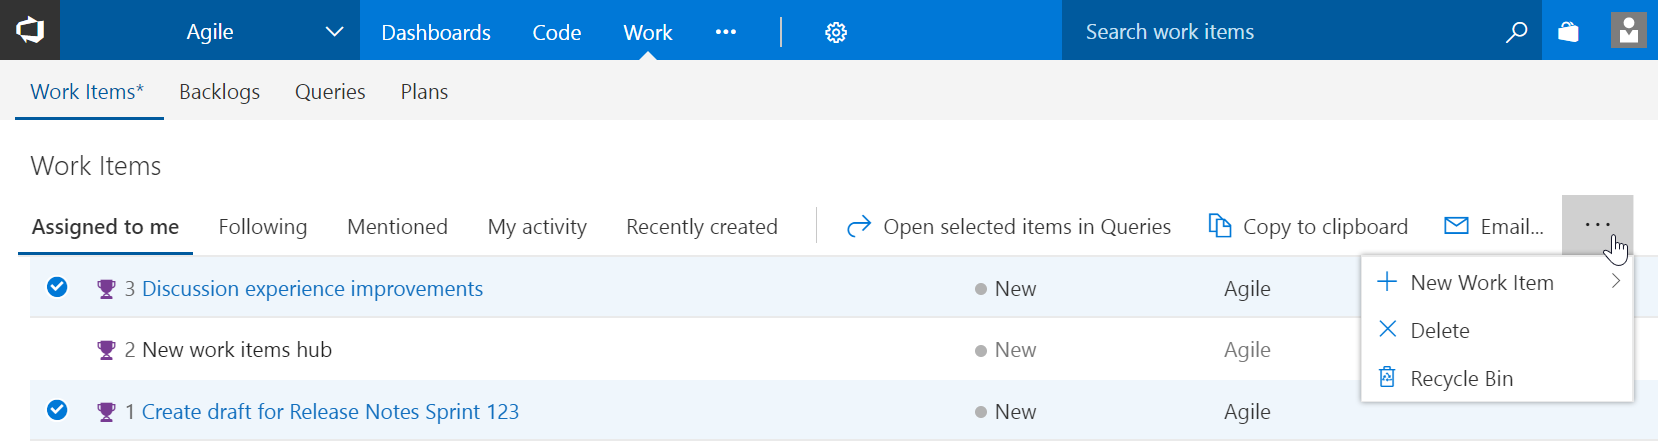 New Work items hub actions